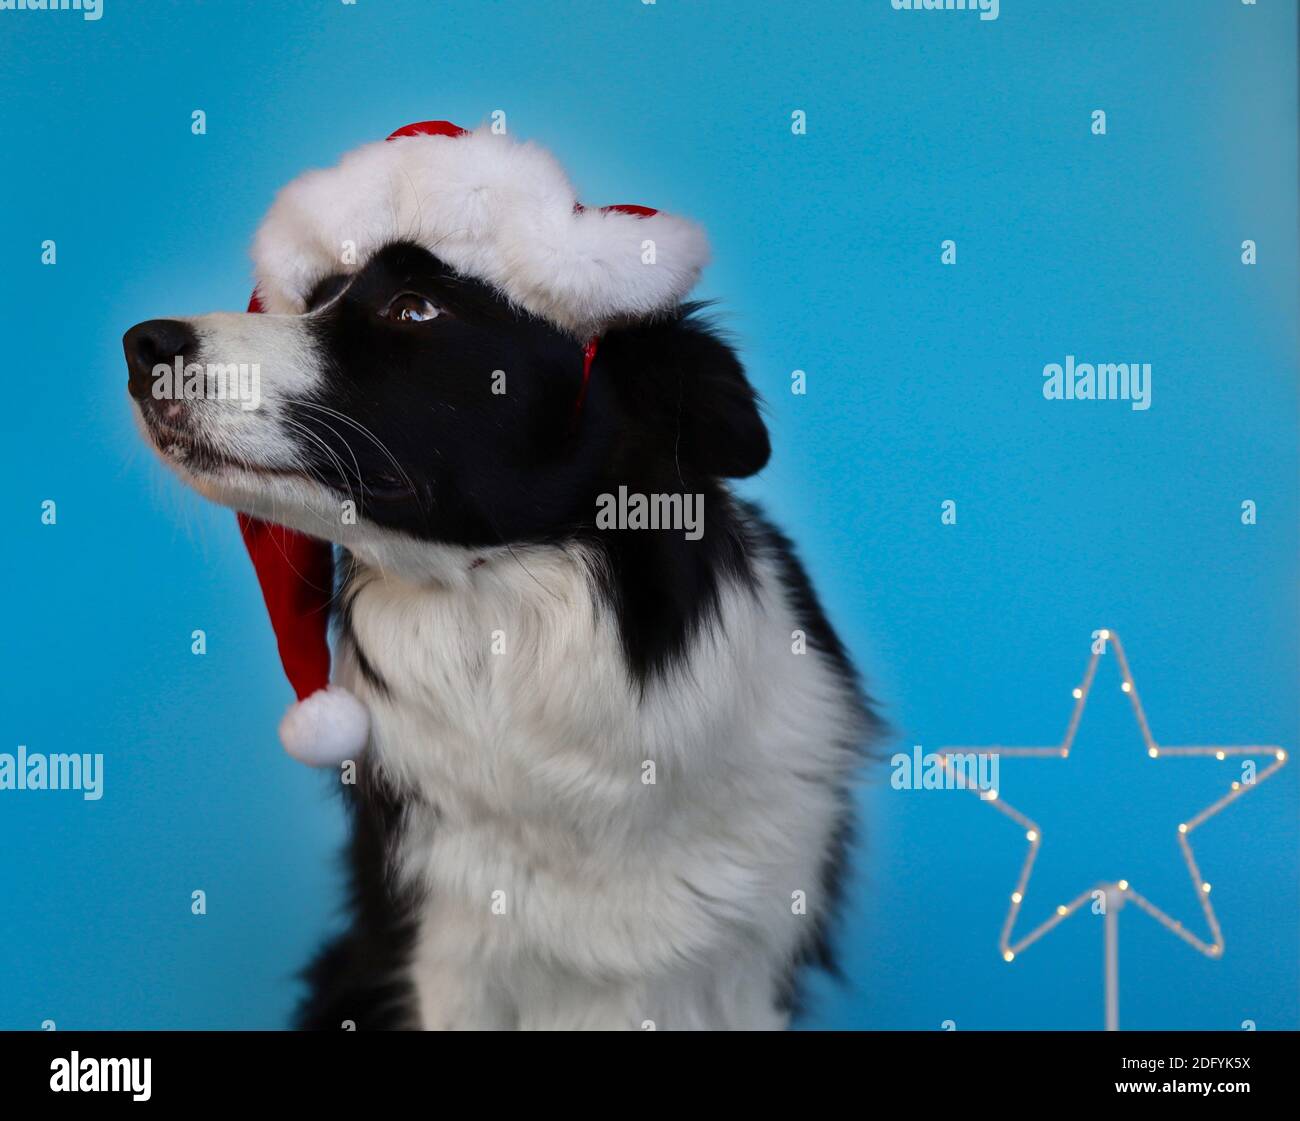 Adorable Border Collie with Santa Hat and Innocent Look Isolated on Blue. Close-up of Black and White Dog with Christmas mood. Stock Photo